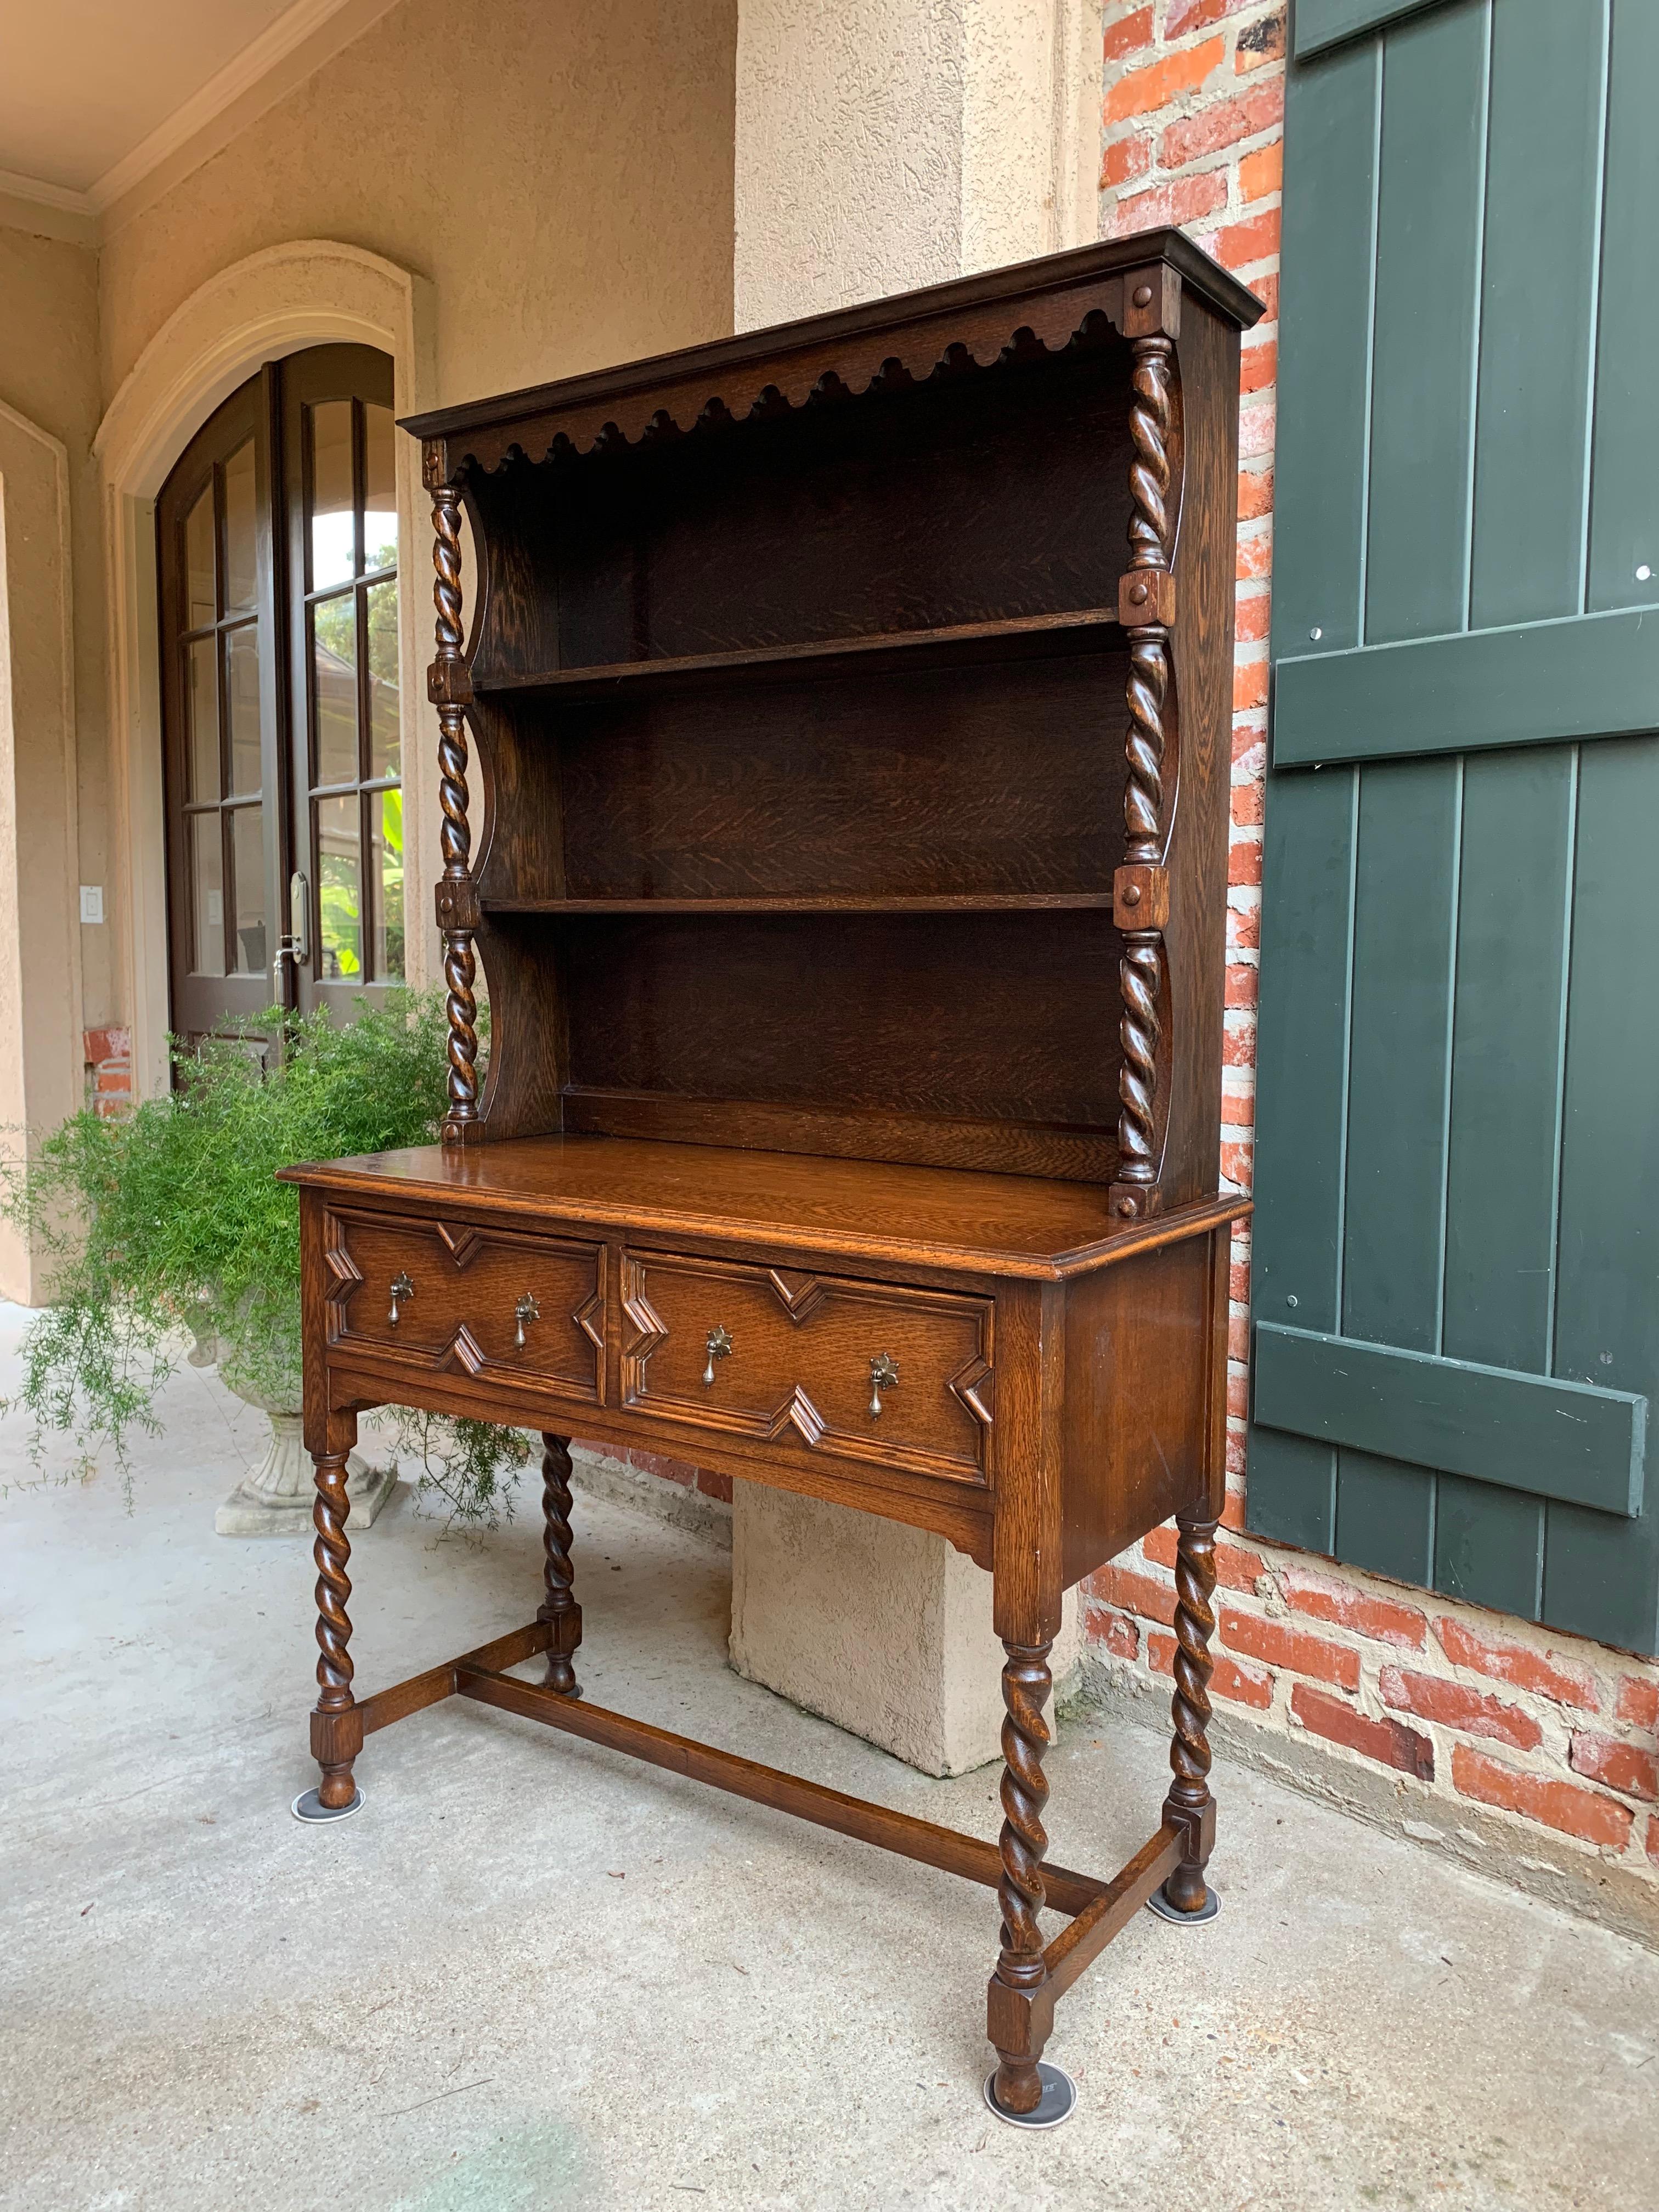 Direct from England, an antique English “Welsh Dresser” is always a Classic, but this one is far beyond most that we find!!
~First, we must mention the smaller size that makes this perfect for so many places in the home, and versatile for anything